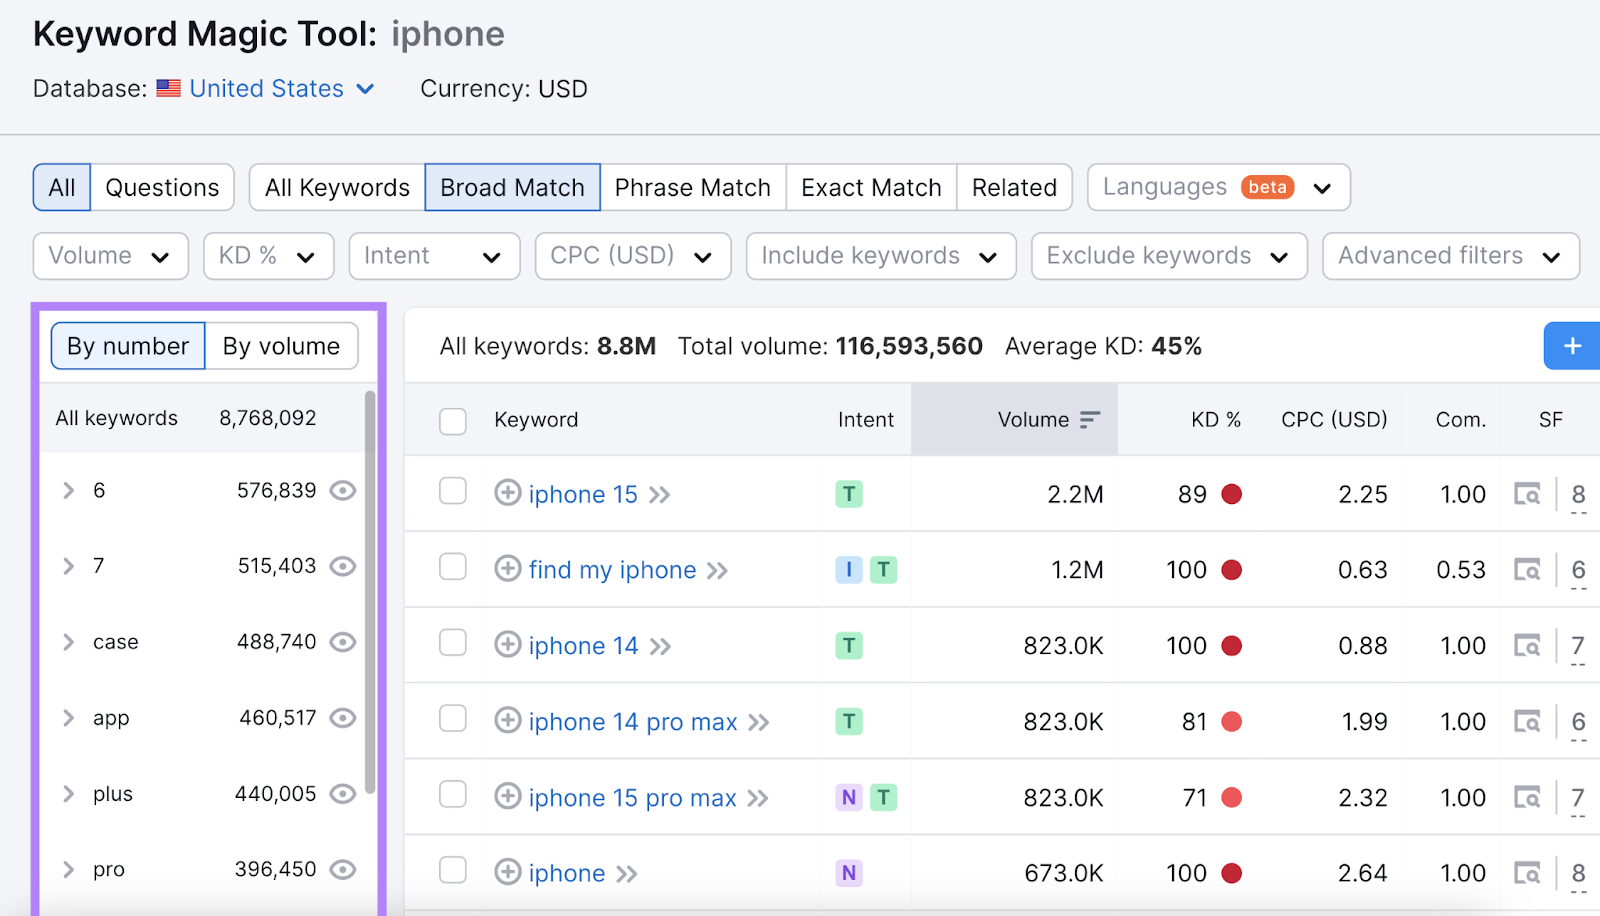 Keyword Magic Tool groups by number and volume. For example the group "case" with narrow results to iphone case related queries.